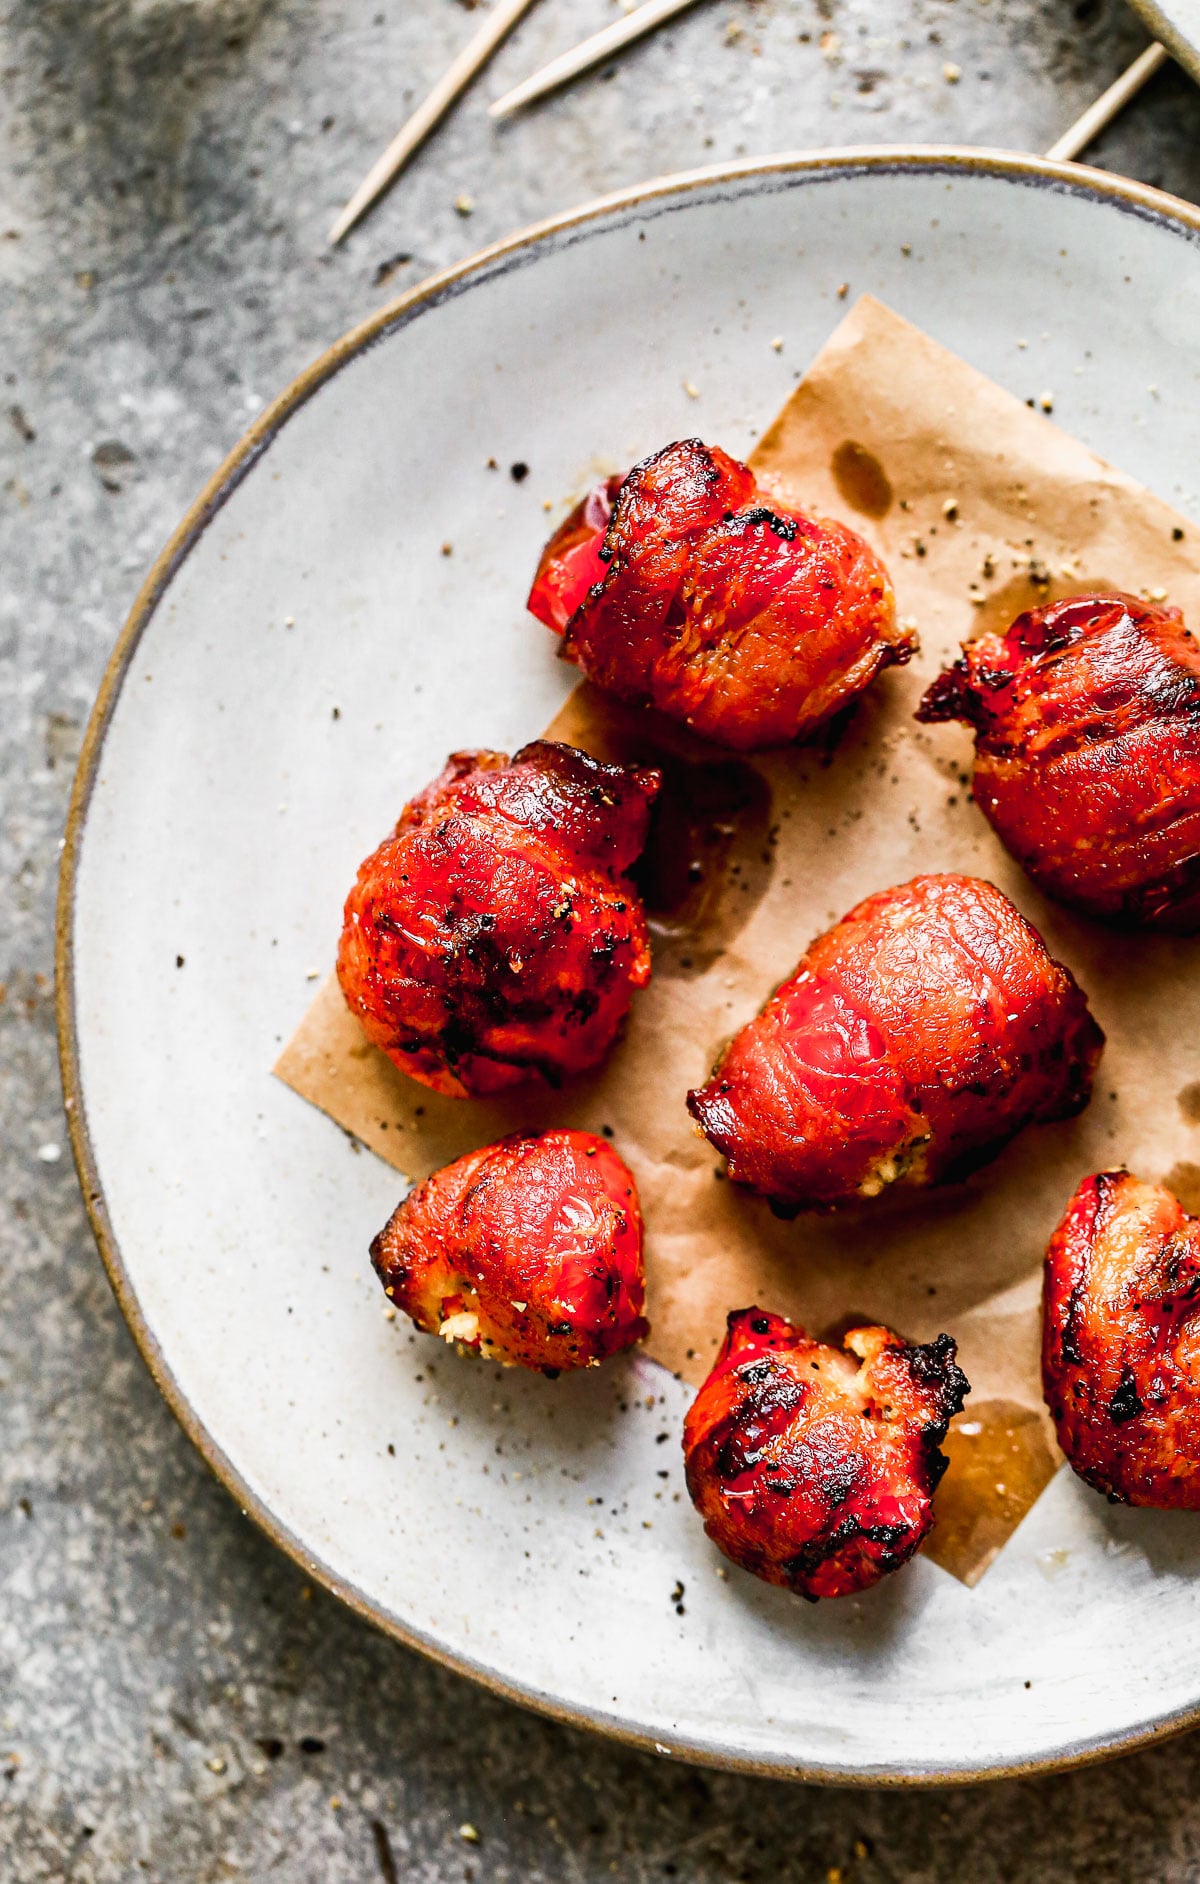 Bacon-Wrapped Stuffed Peppadews:These little bites of heaven are stuffed with our favorite herbed cheese, wrapped in salty bacon and popped into the air fryer until irresistibly crispy and creamy. The perfect happy hour treat!&nbsp;